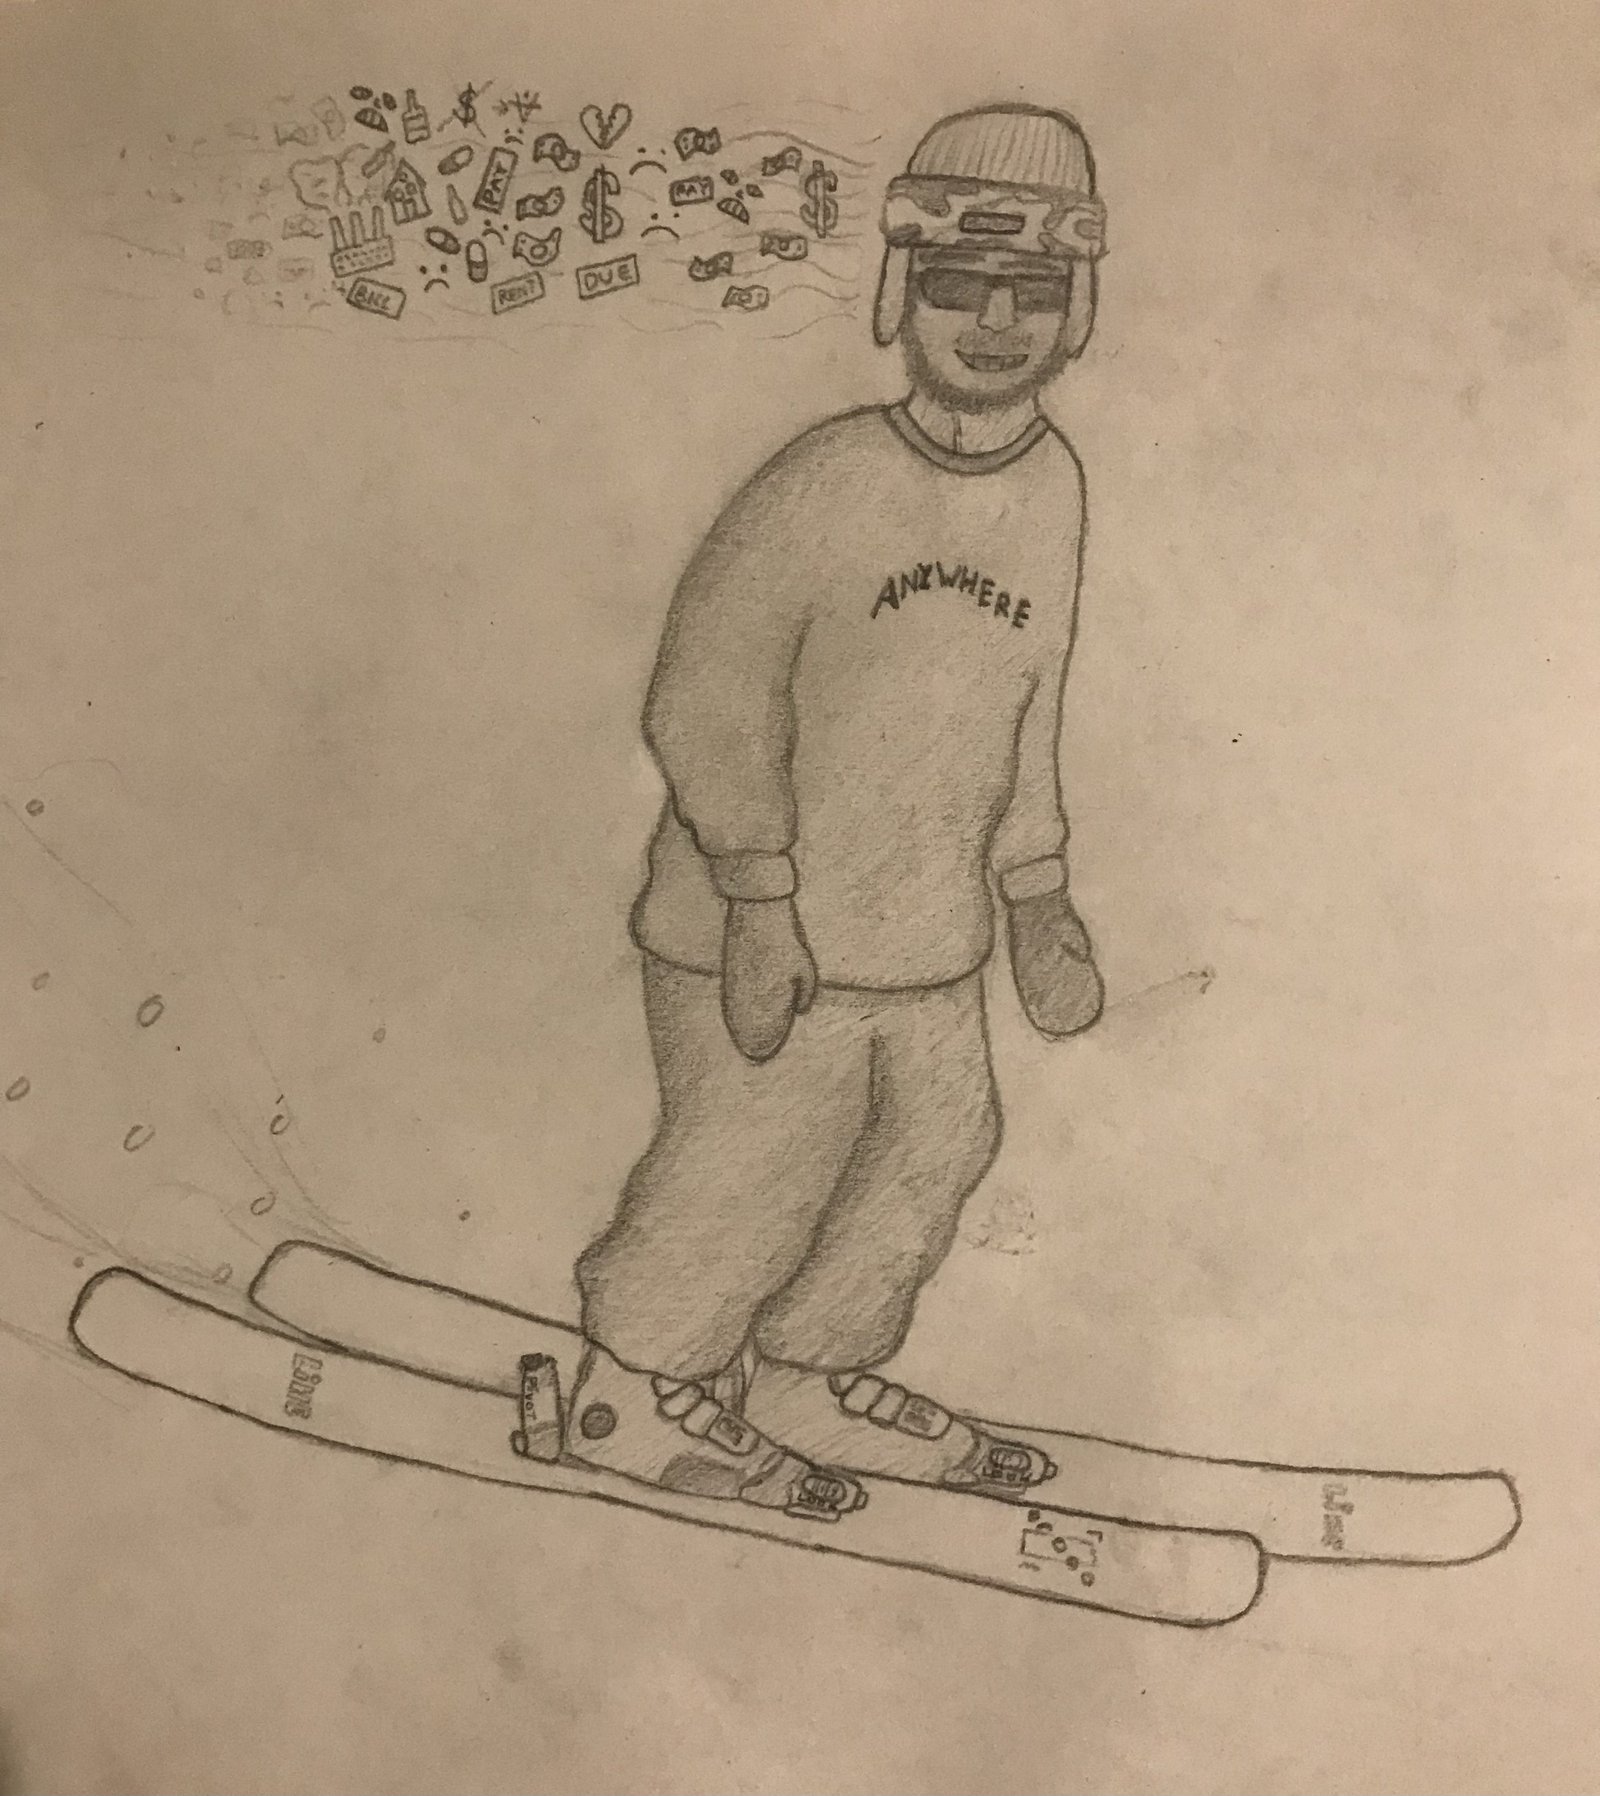 Skiing away problems